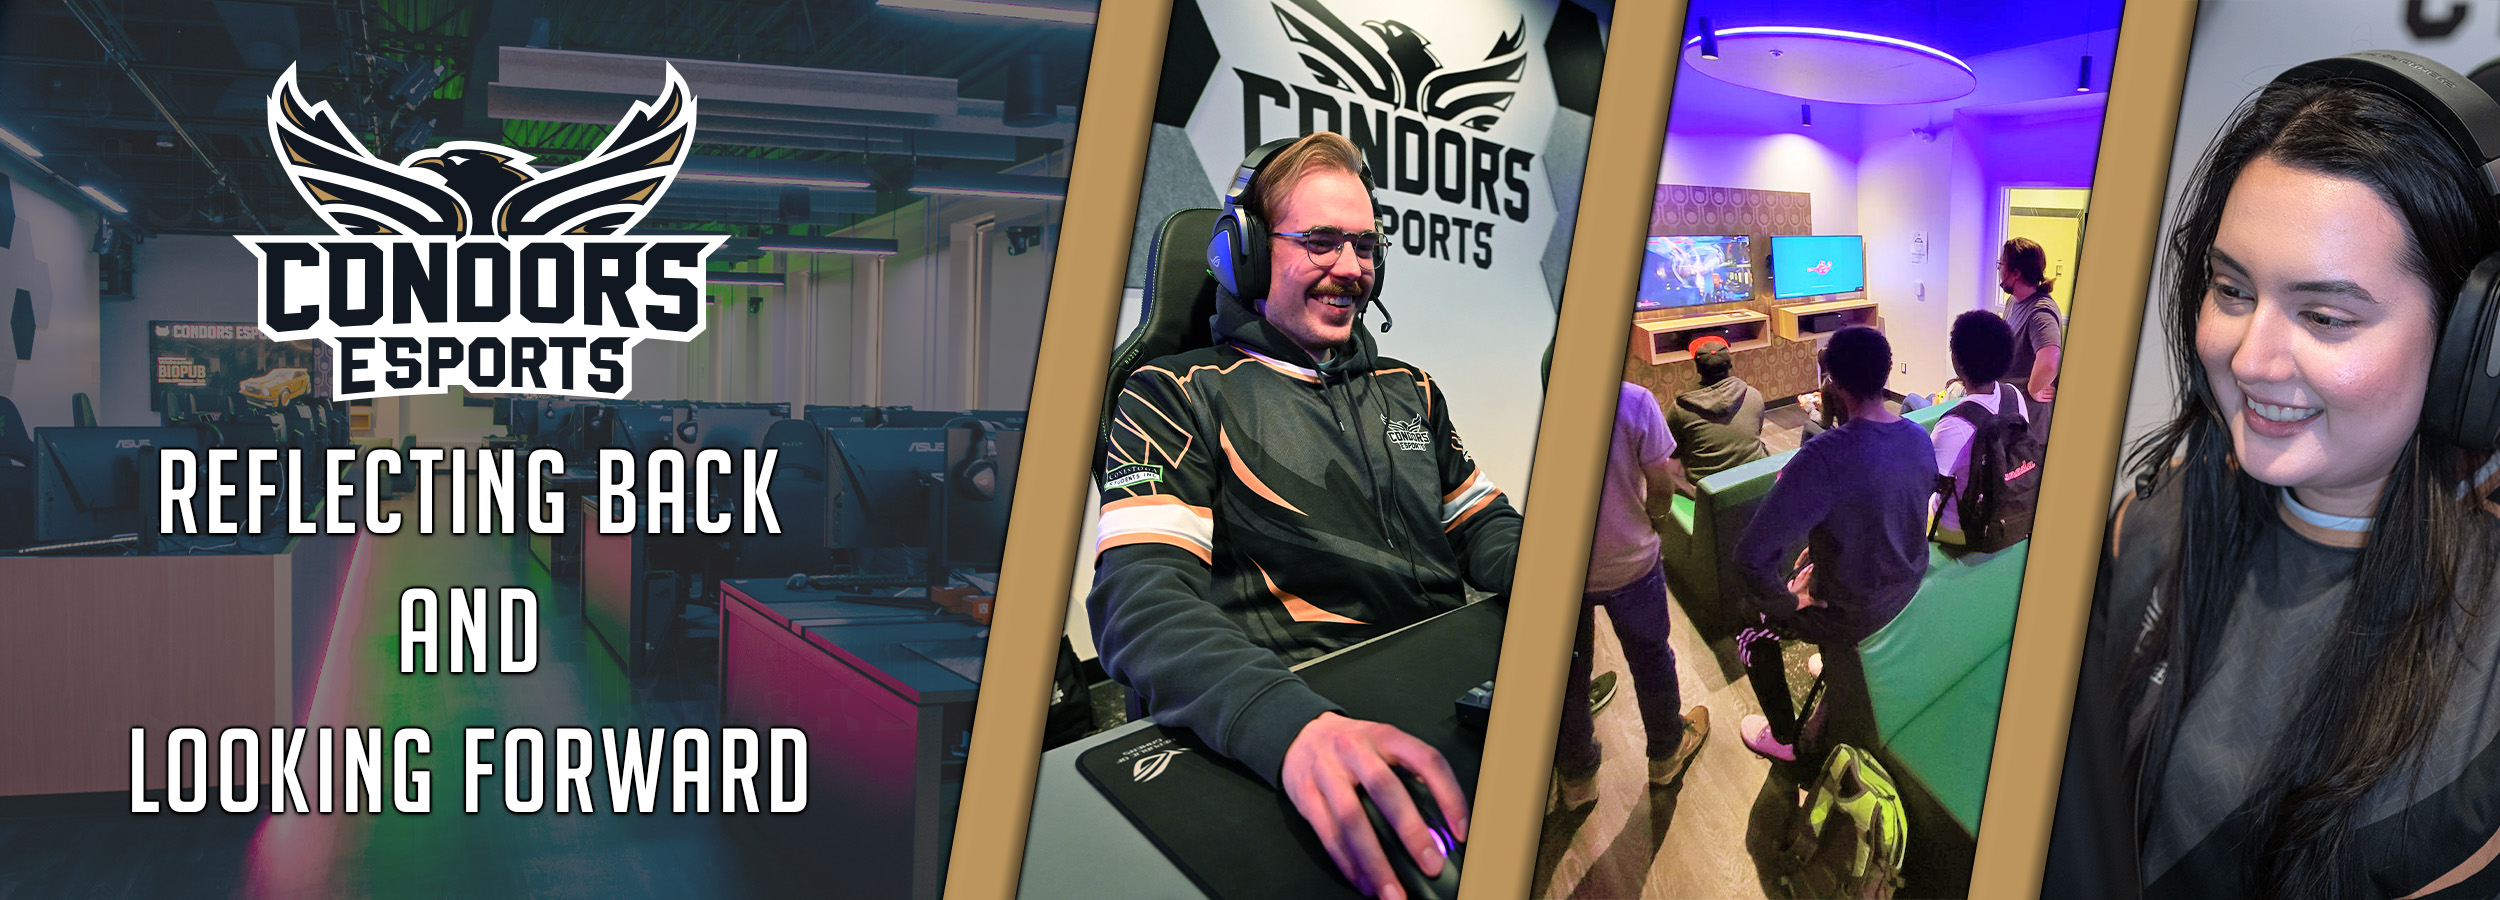 A web banner. On the left the headline is Condors Esports reflecting back and looking forward. on the right is 3 collaged images of students playing esports. 